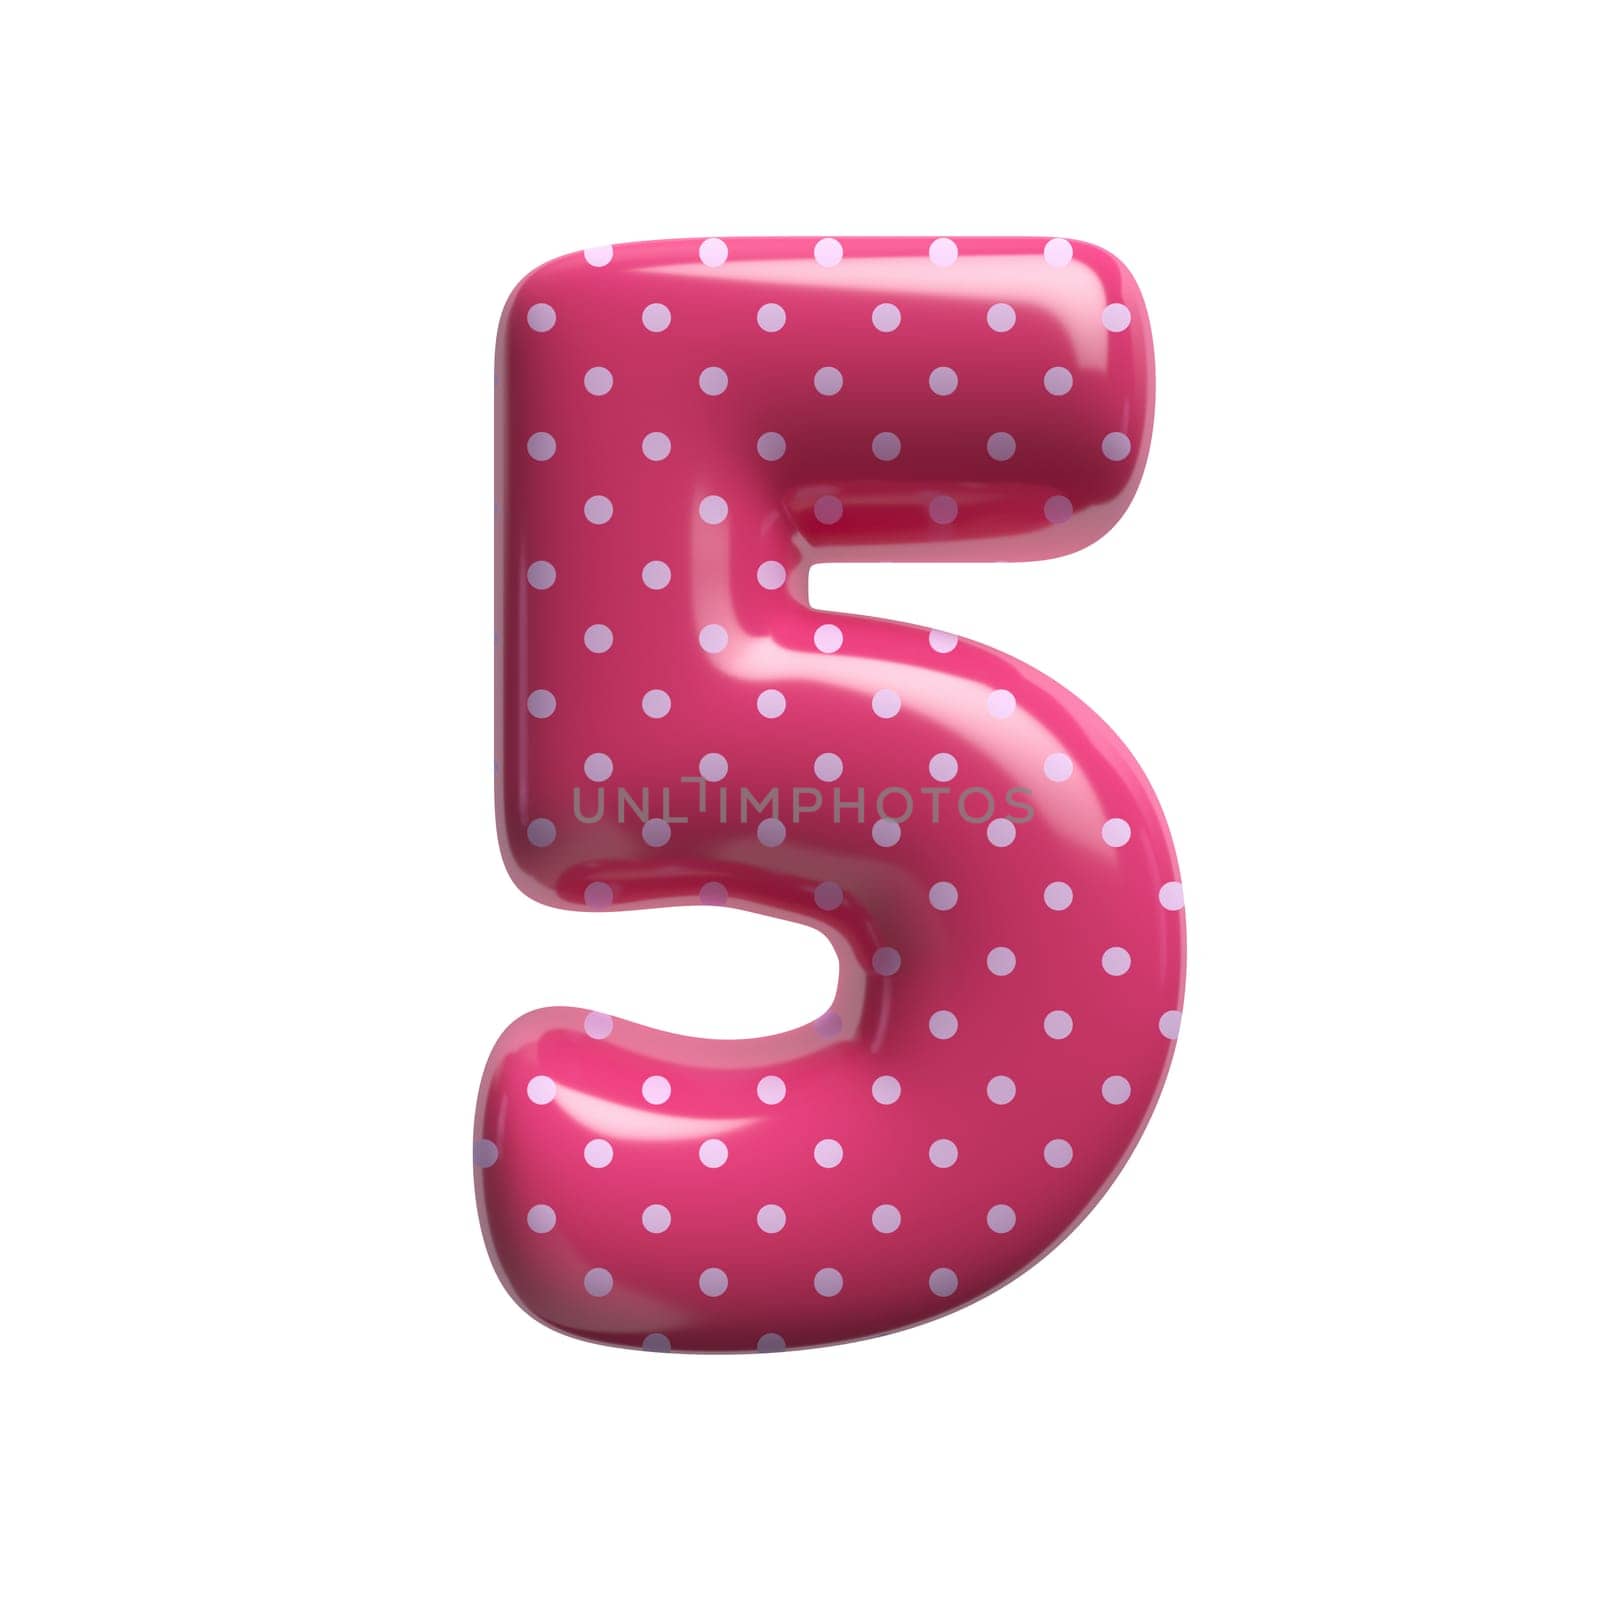 Polka dot number 5 - 3d pink retro digit - Suitable for Fashion, retro design or decoration related subjects by chrisroll